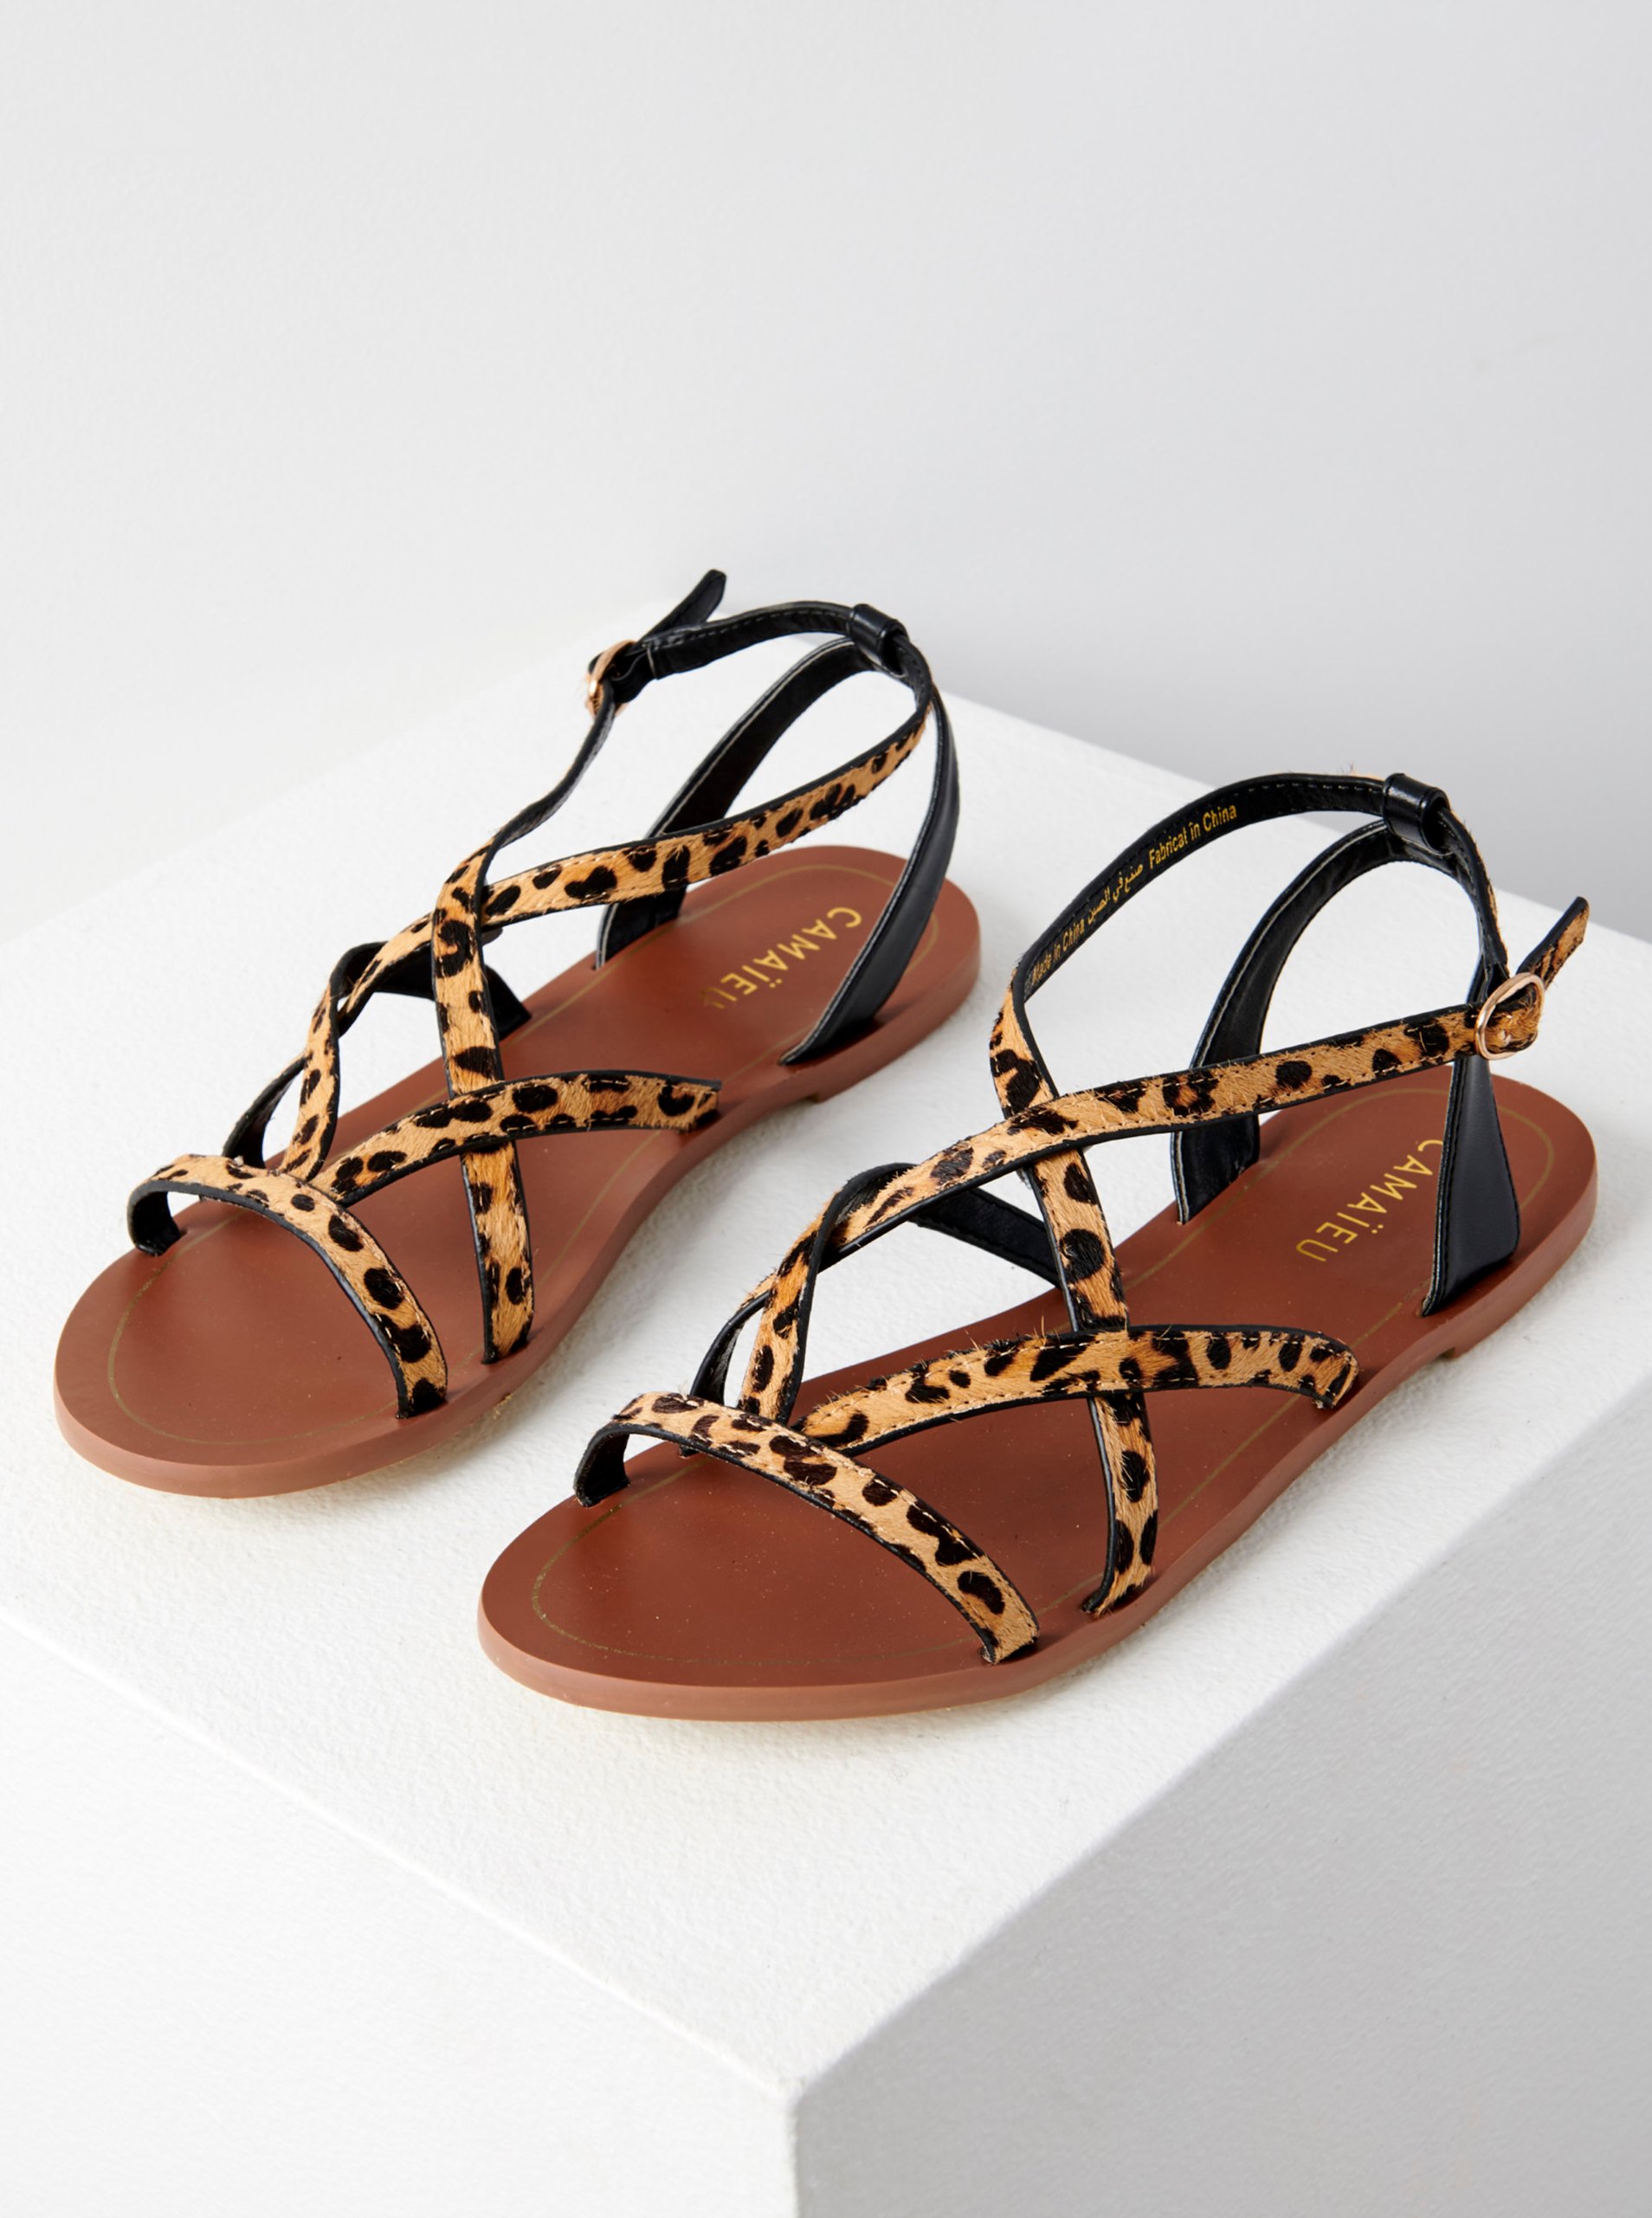 Brown Leather Sandals with Leopard Pattern CAMAIEU - Women